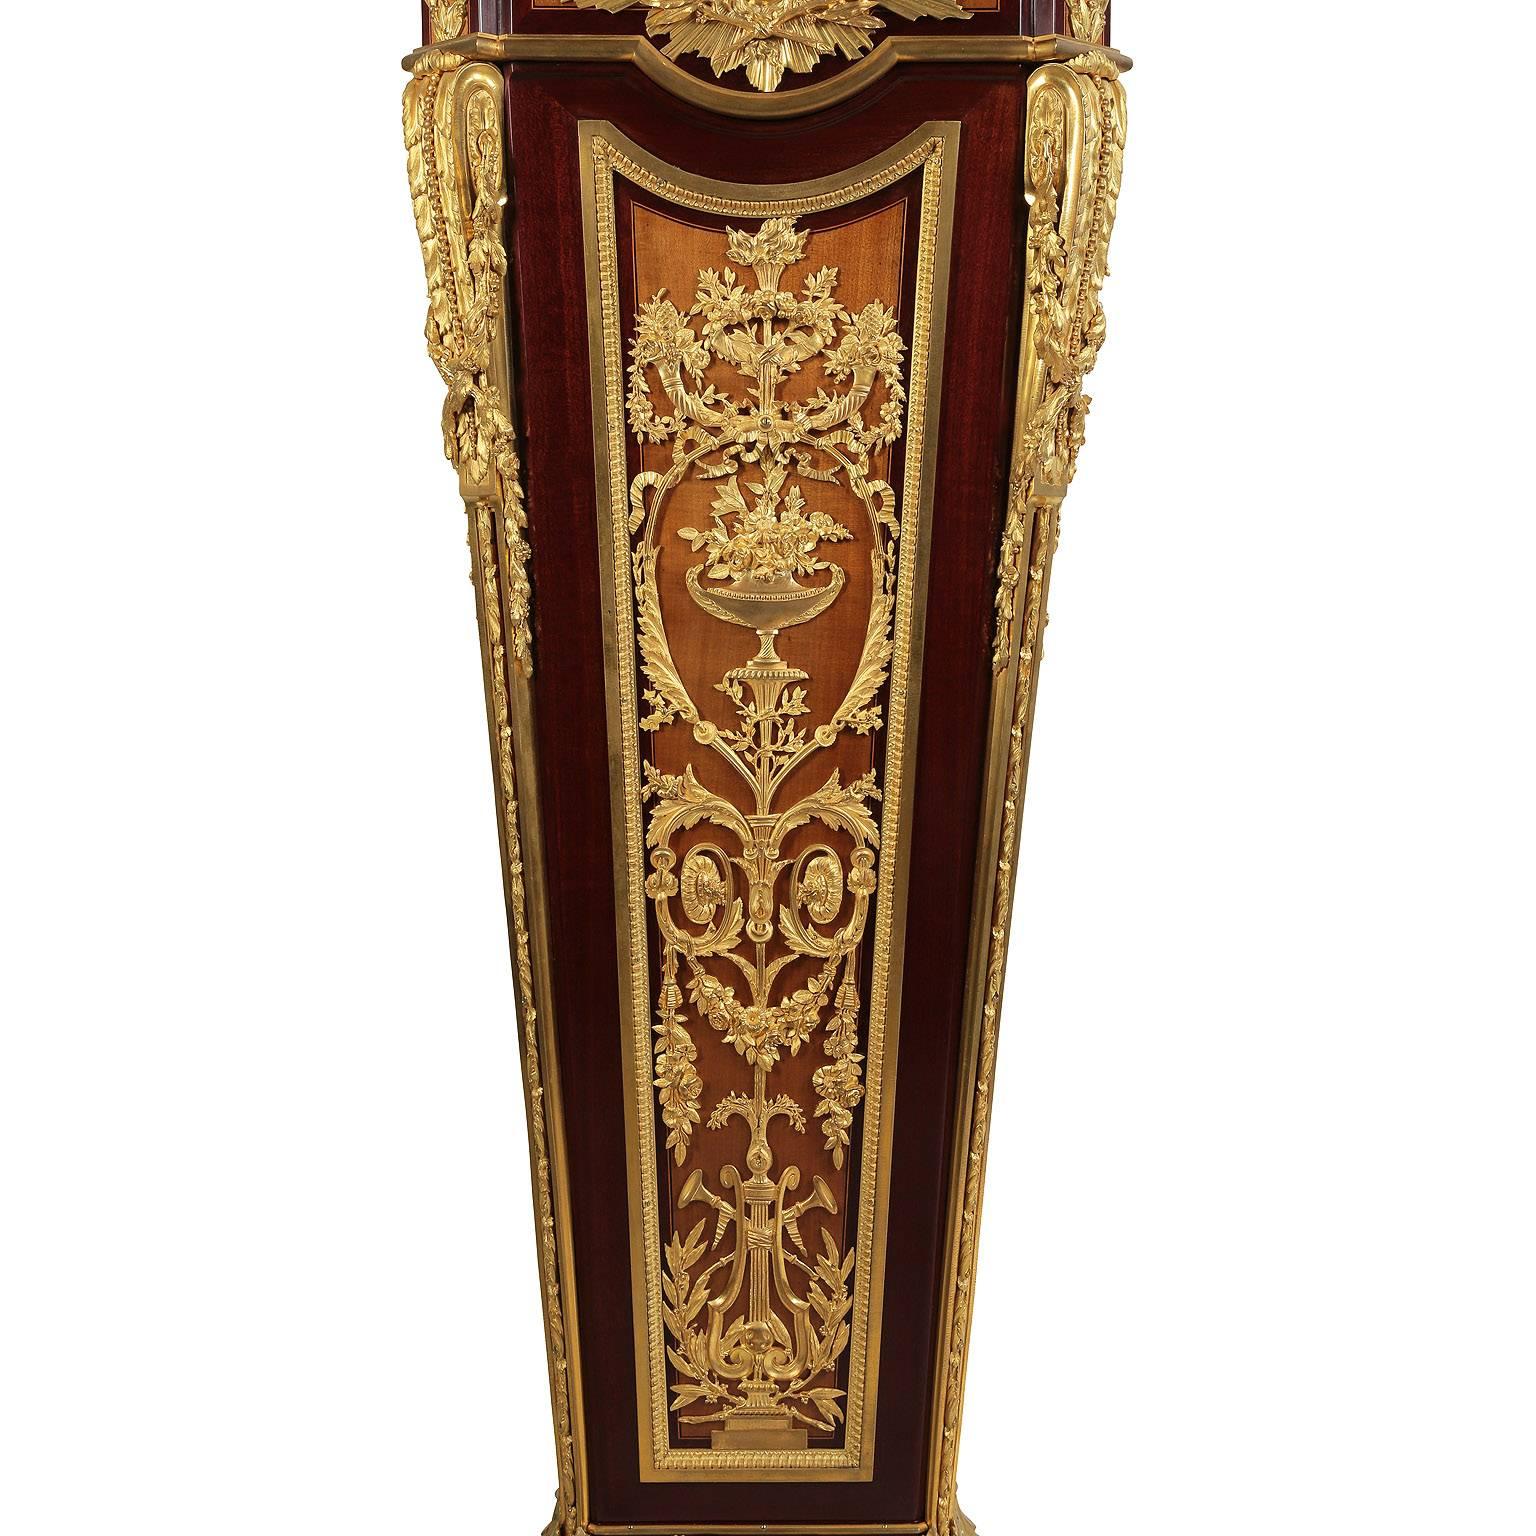 Carved French 19th C. Louis XVI Style Cherub Tall-Case Clock After Jean-Henri Riesener For Sale